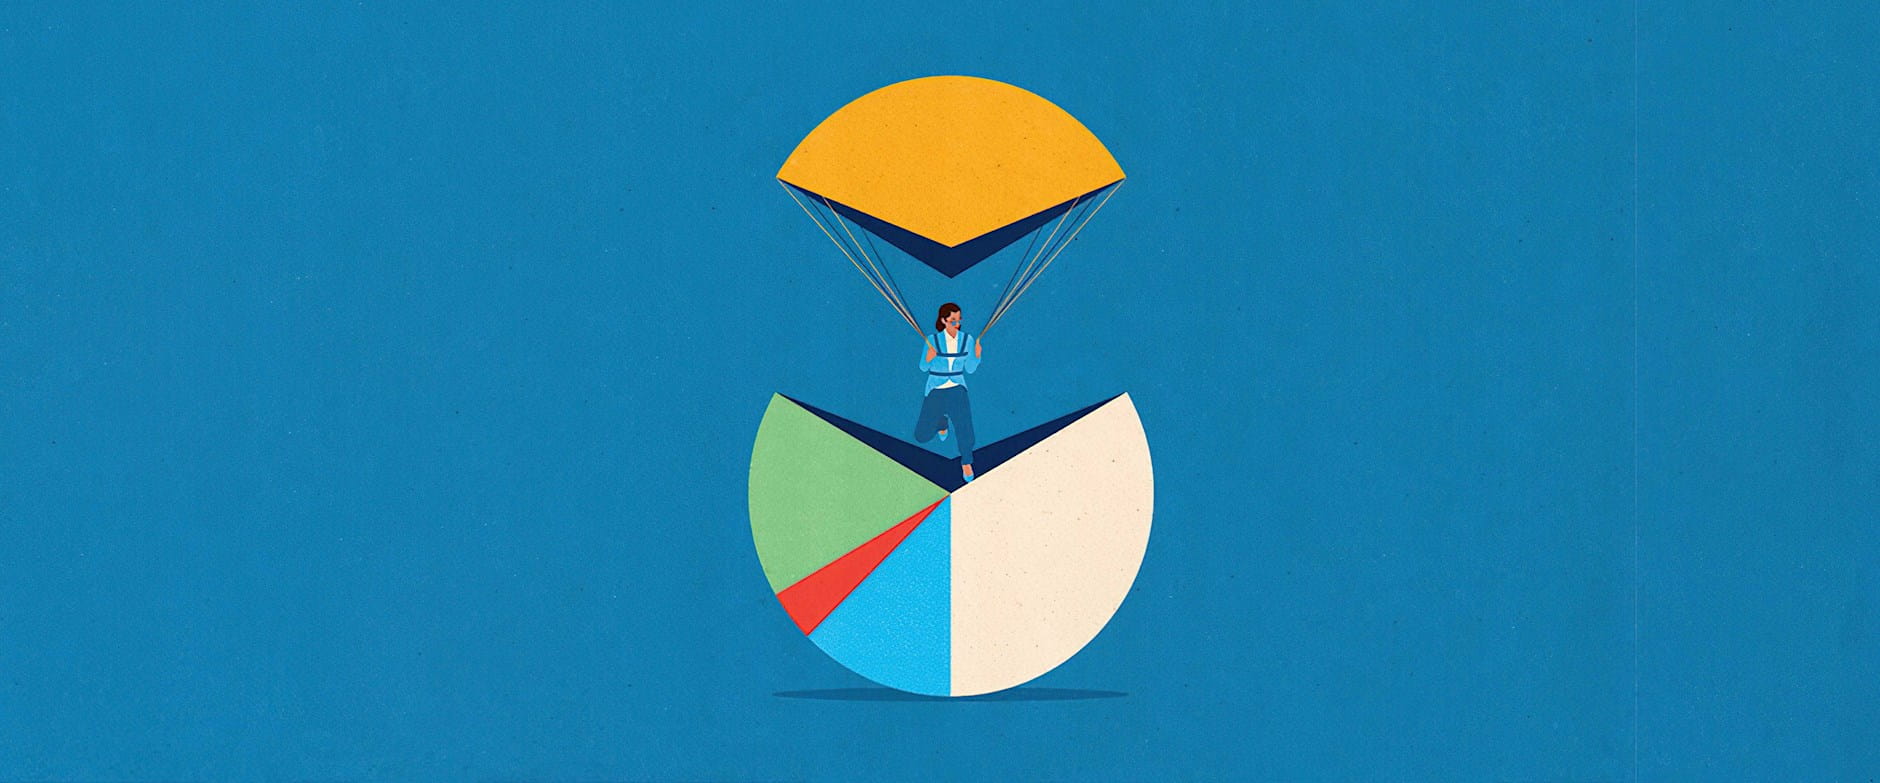 An illustration of a woman parachuting, whose shape forms the top portion of a pie chart